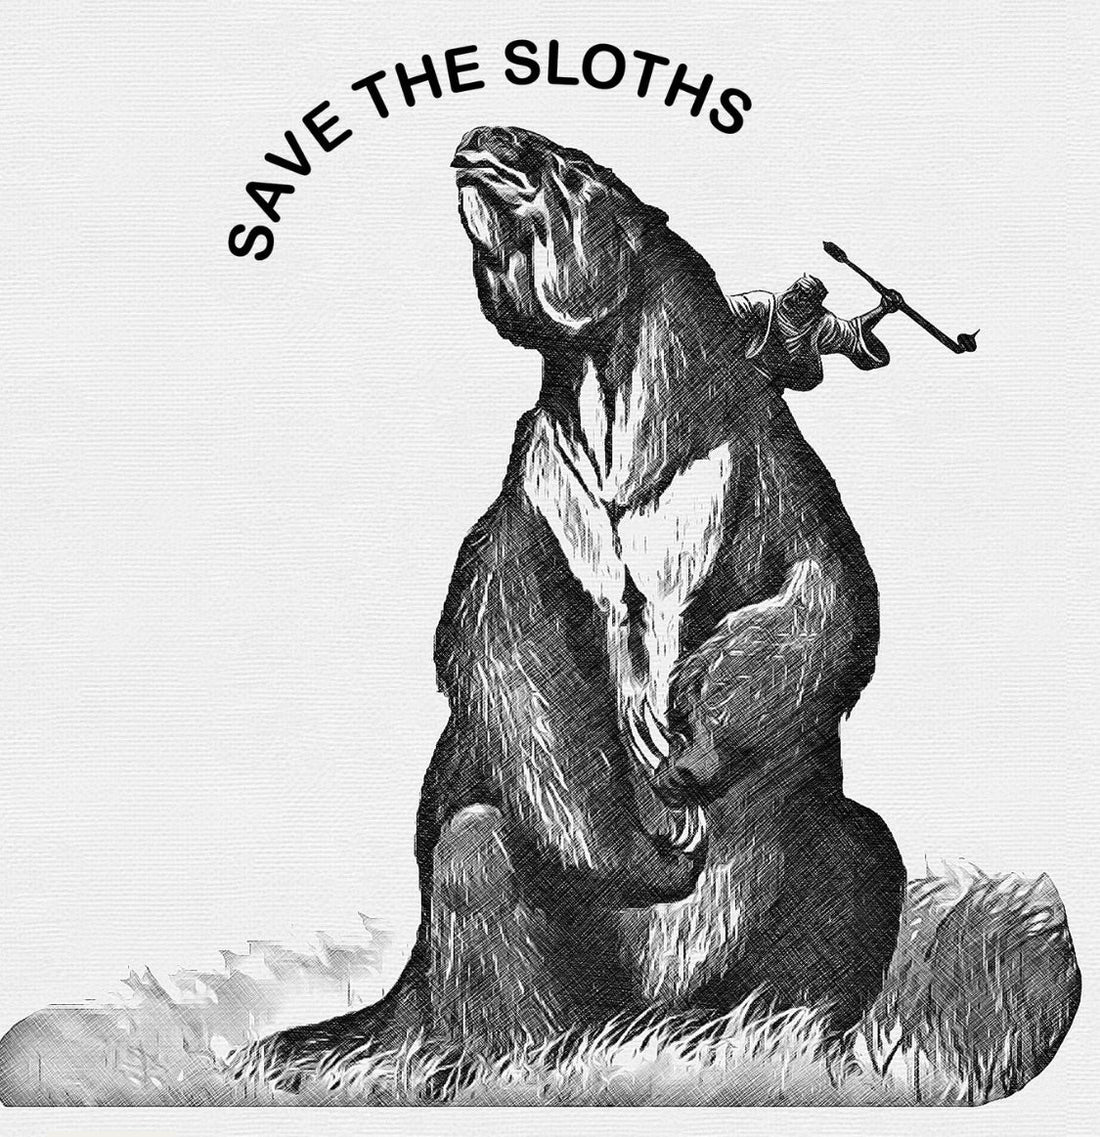 Supporting Sloth Conservation through Clothing and Art: Preserving Biodiversity - Science Label